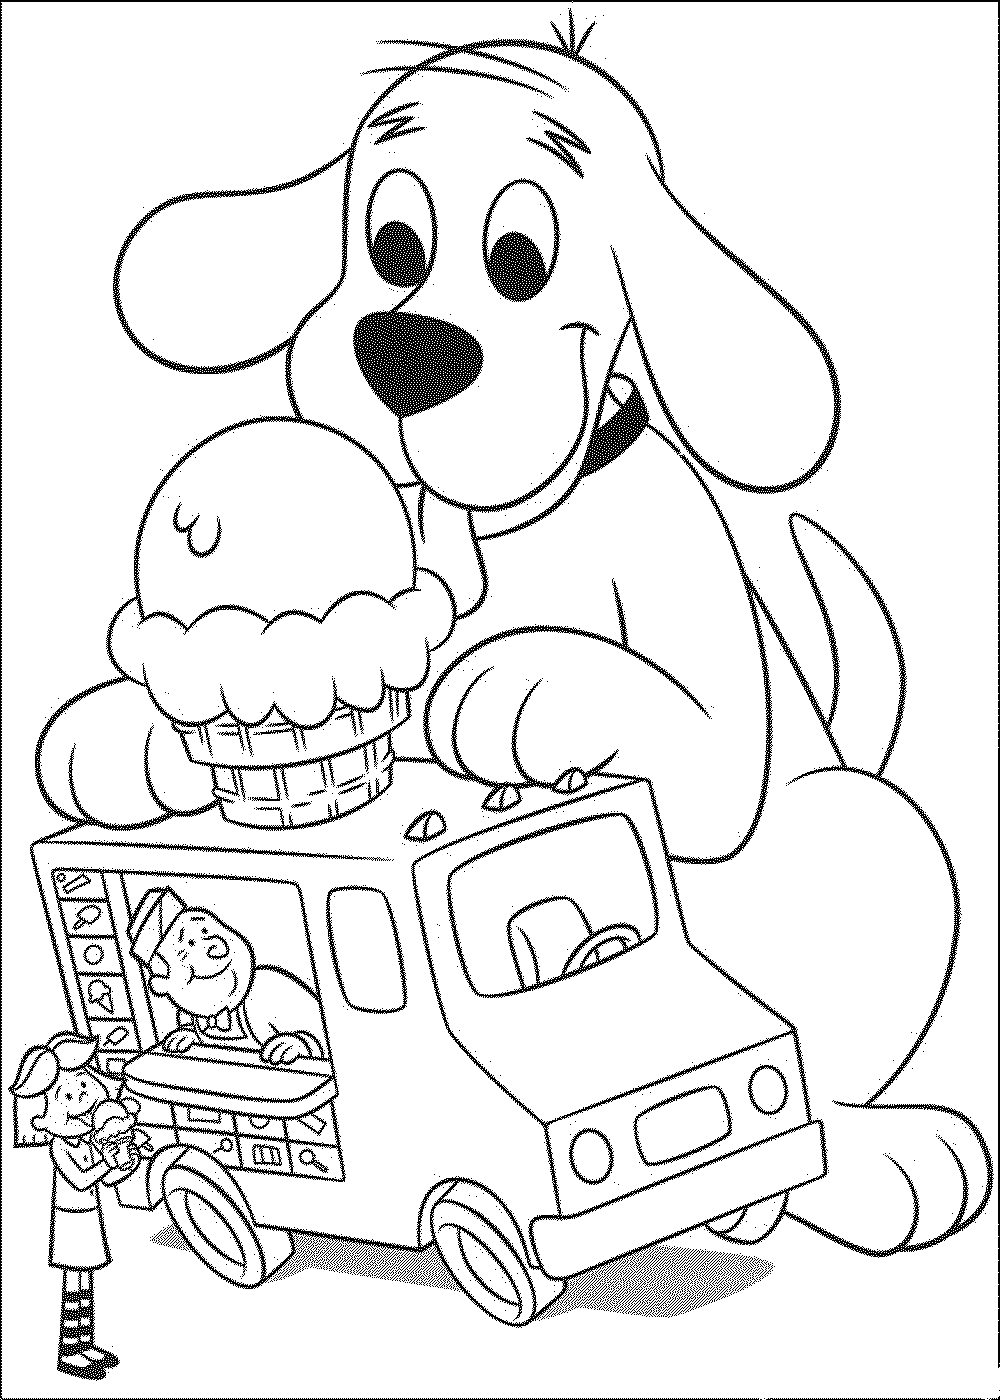 Employ Dog Coloring Pages for Your Children's Creative Time